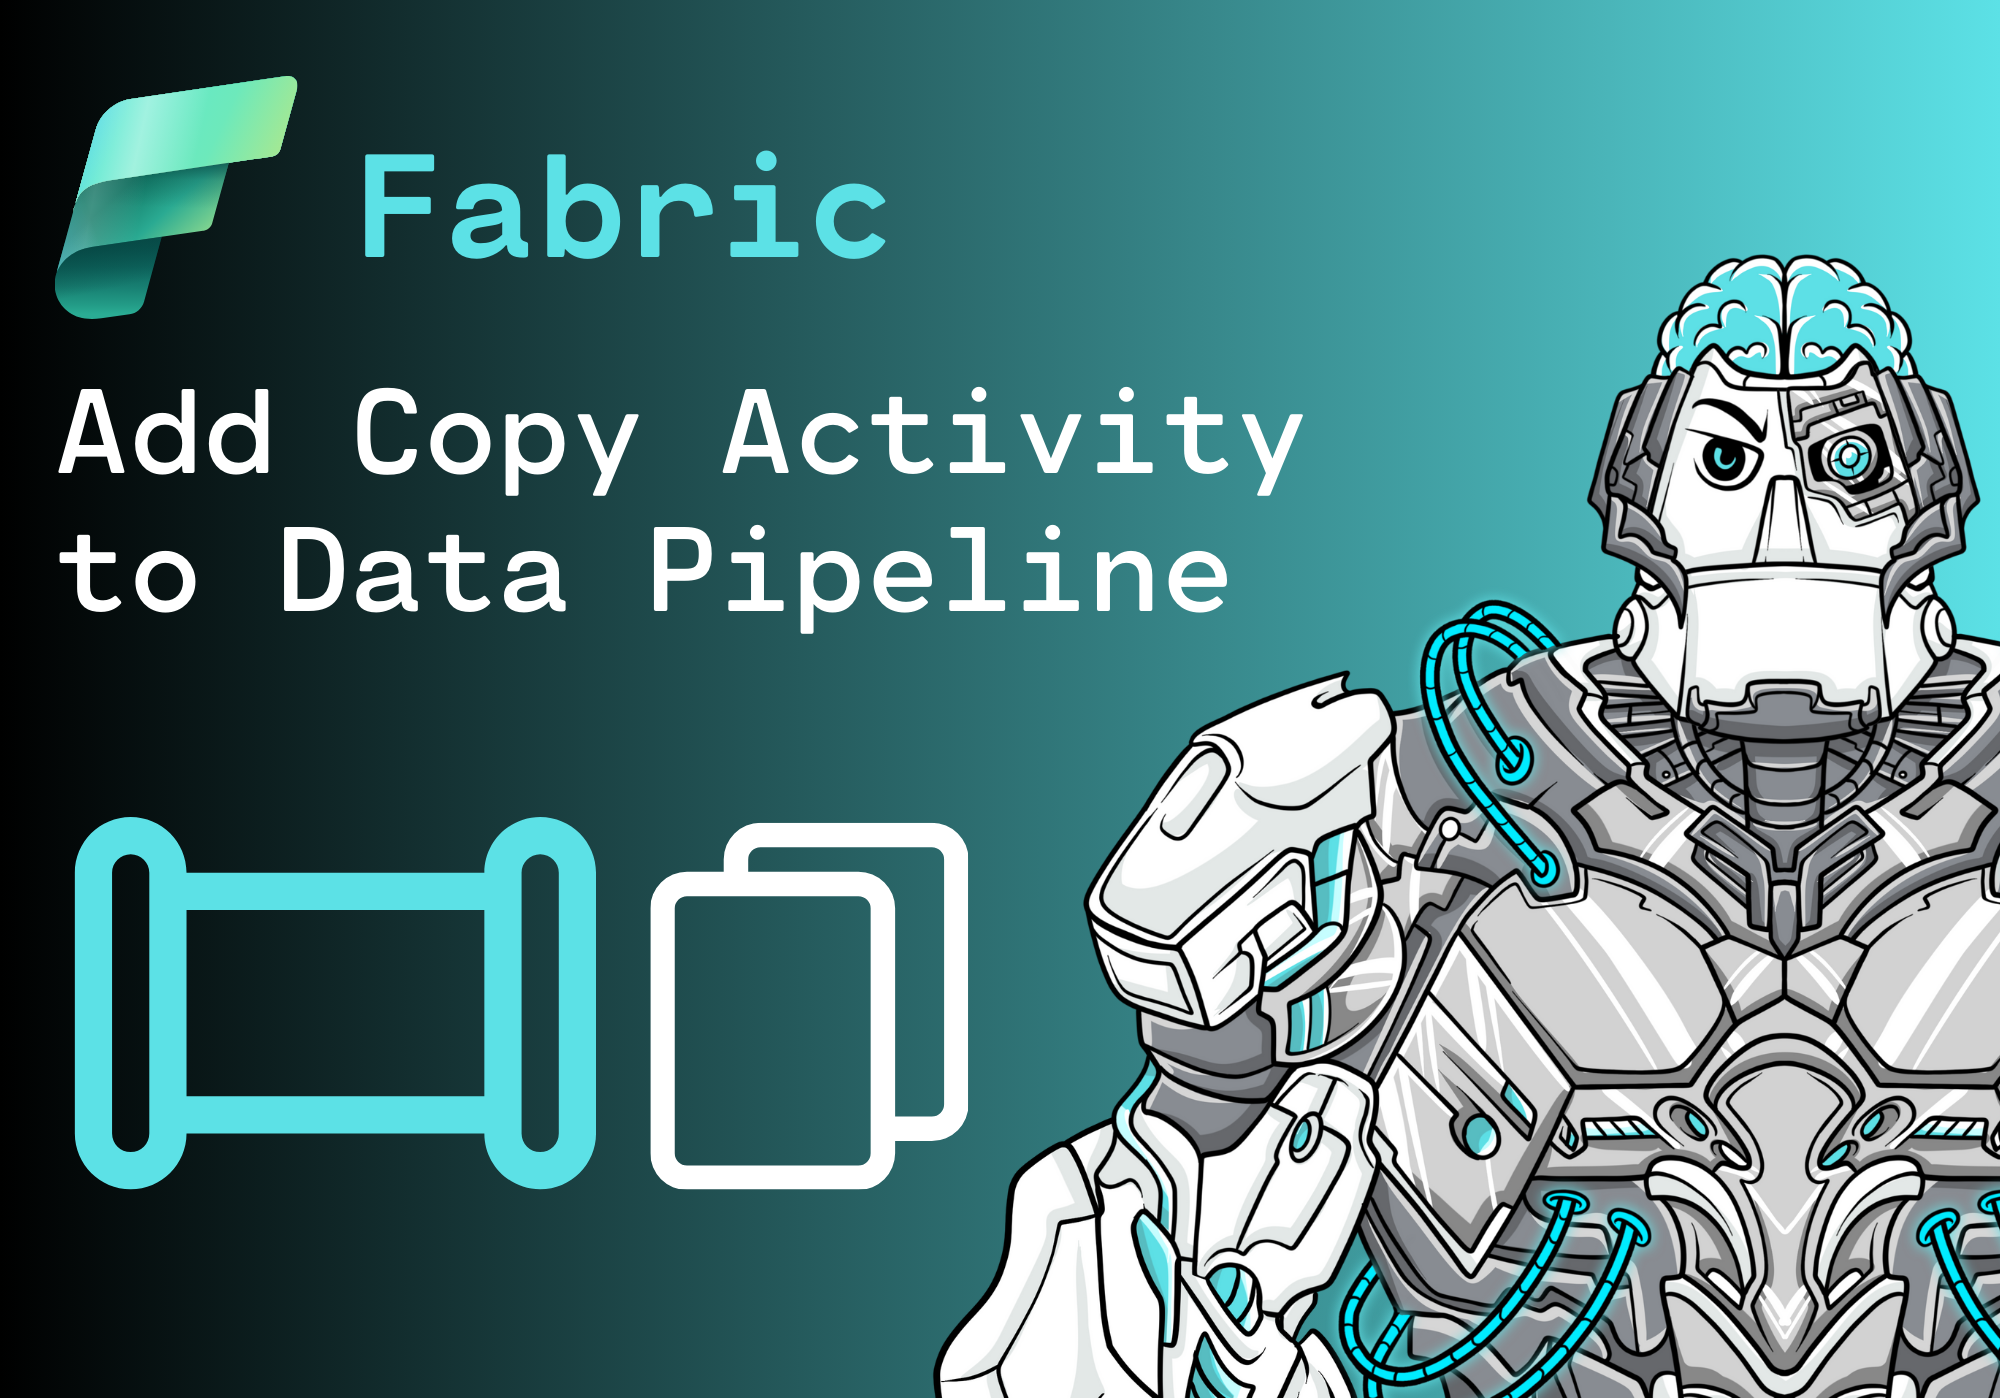 How to add a Copy Activity to a Data Pipeline in Microsoft Fabric